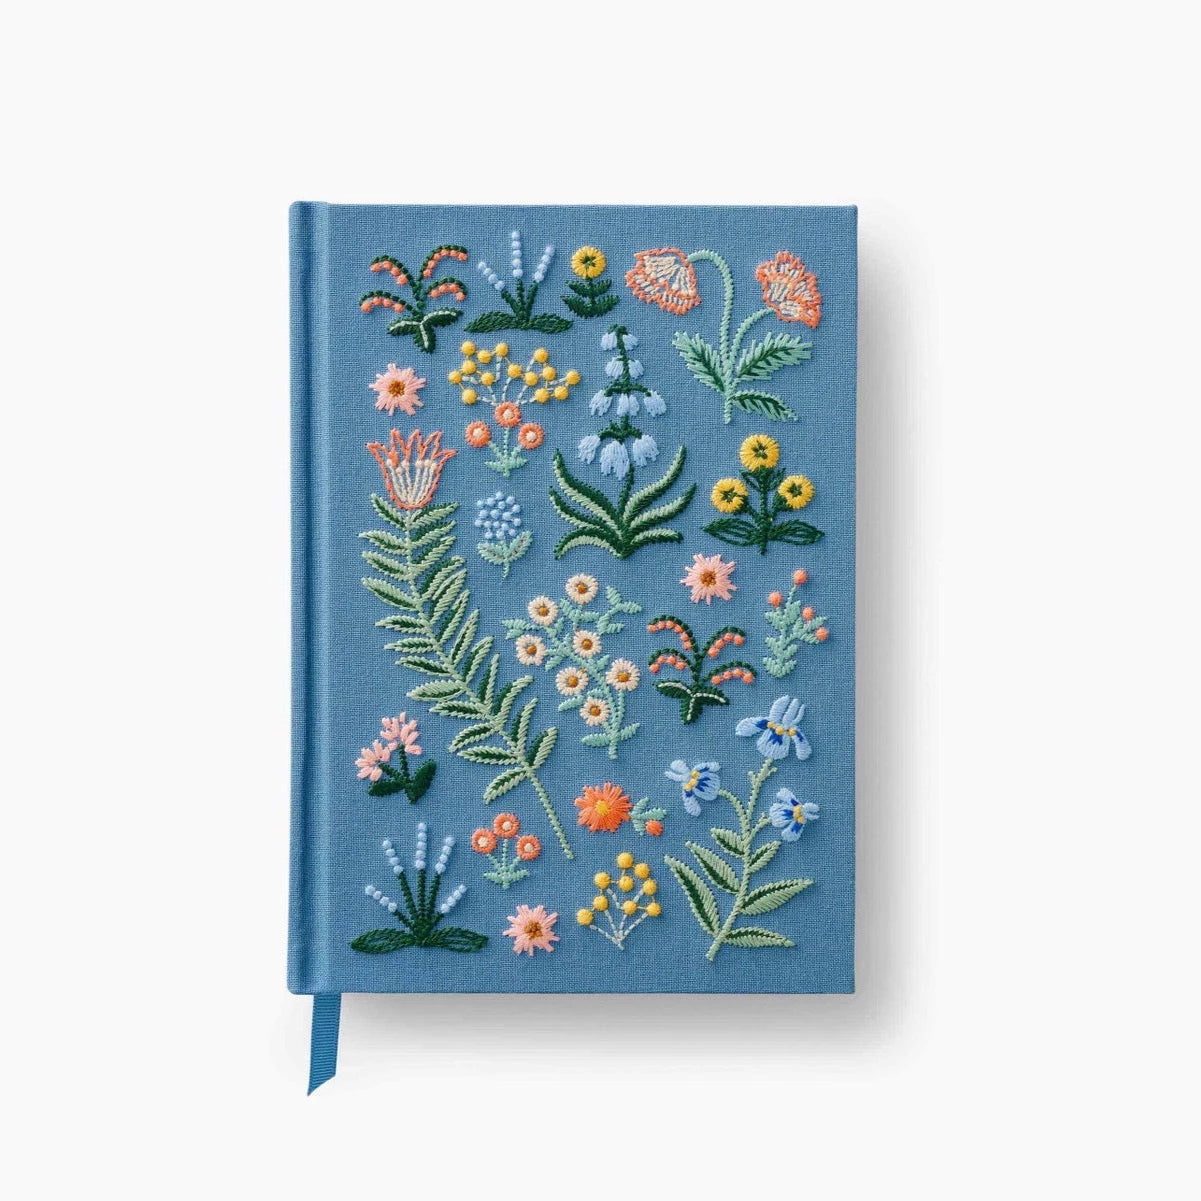 Light blue fabric journal. Has embroidered flowers all over the cover. Flower stitching colors vary in shades of green, blue, yellow, red/pink